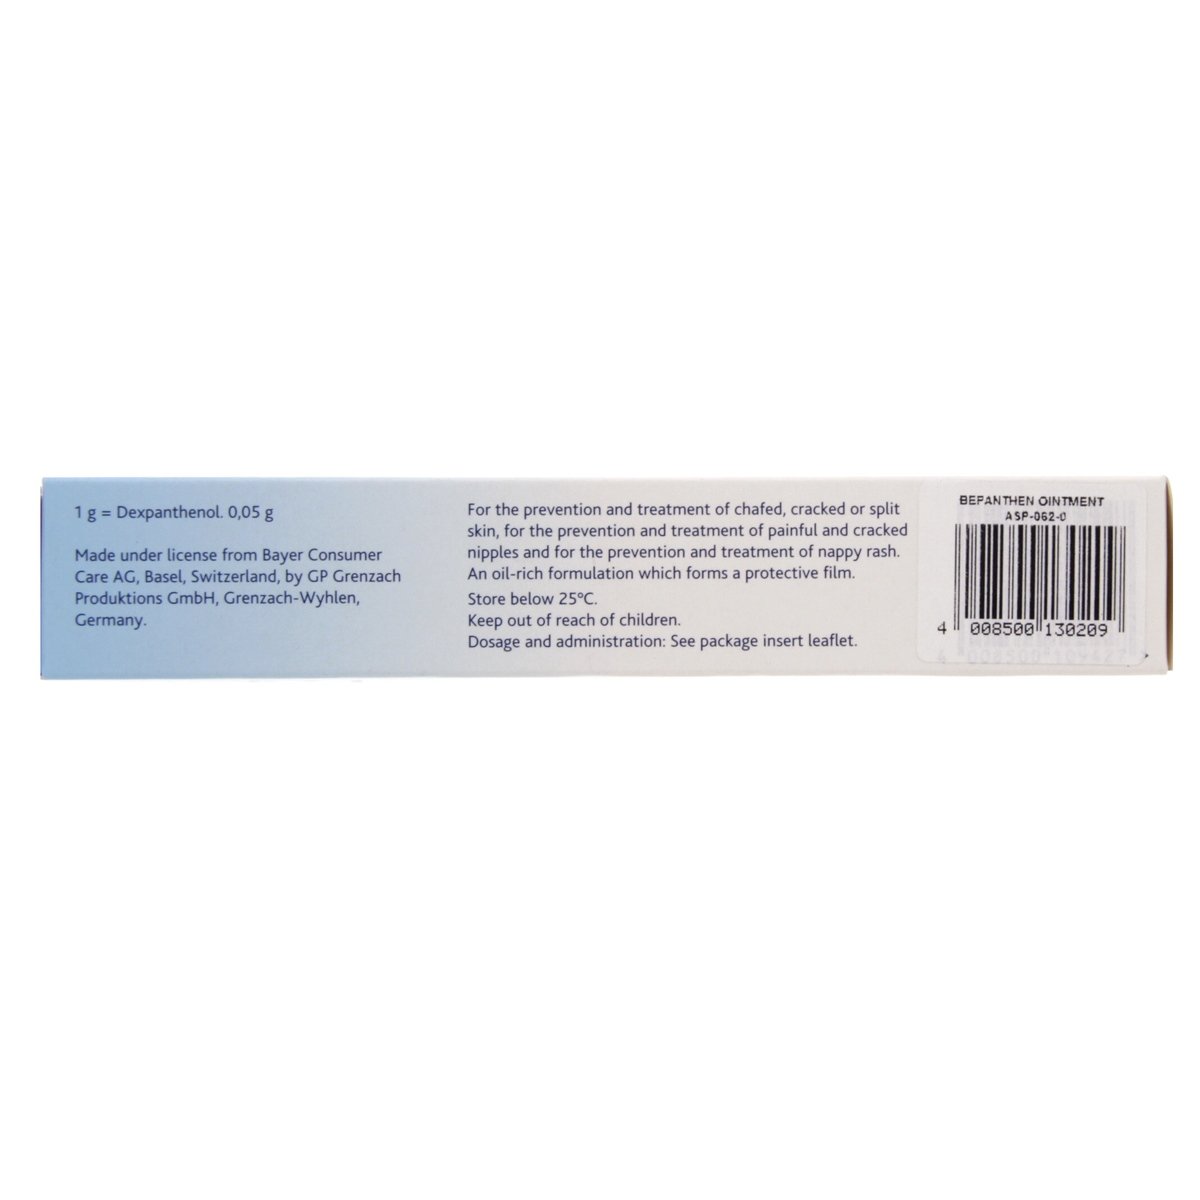 Bepanthen Protective Baby Ointment 30 g